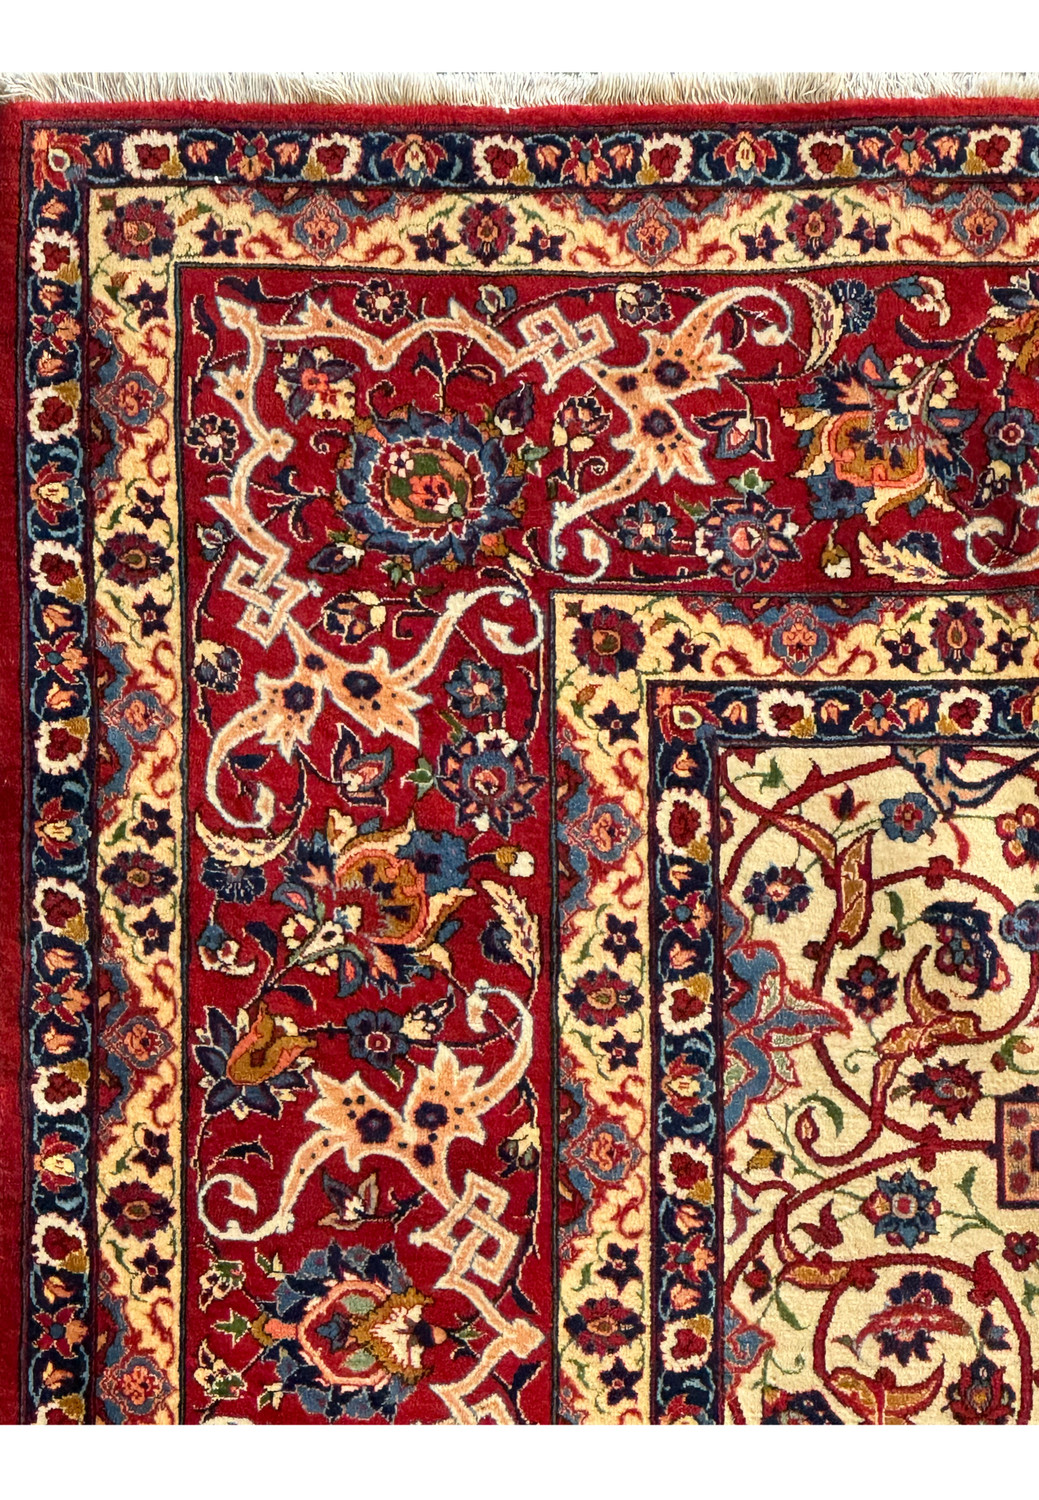 Zoomed-in view of the rug's edge, displaying the detailed border patterns and the quality of the weave.